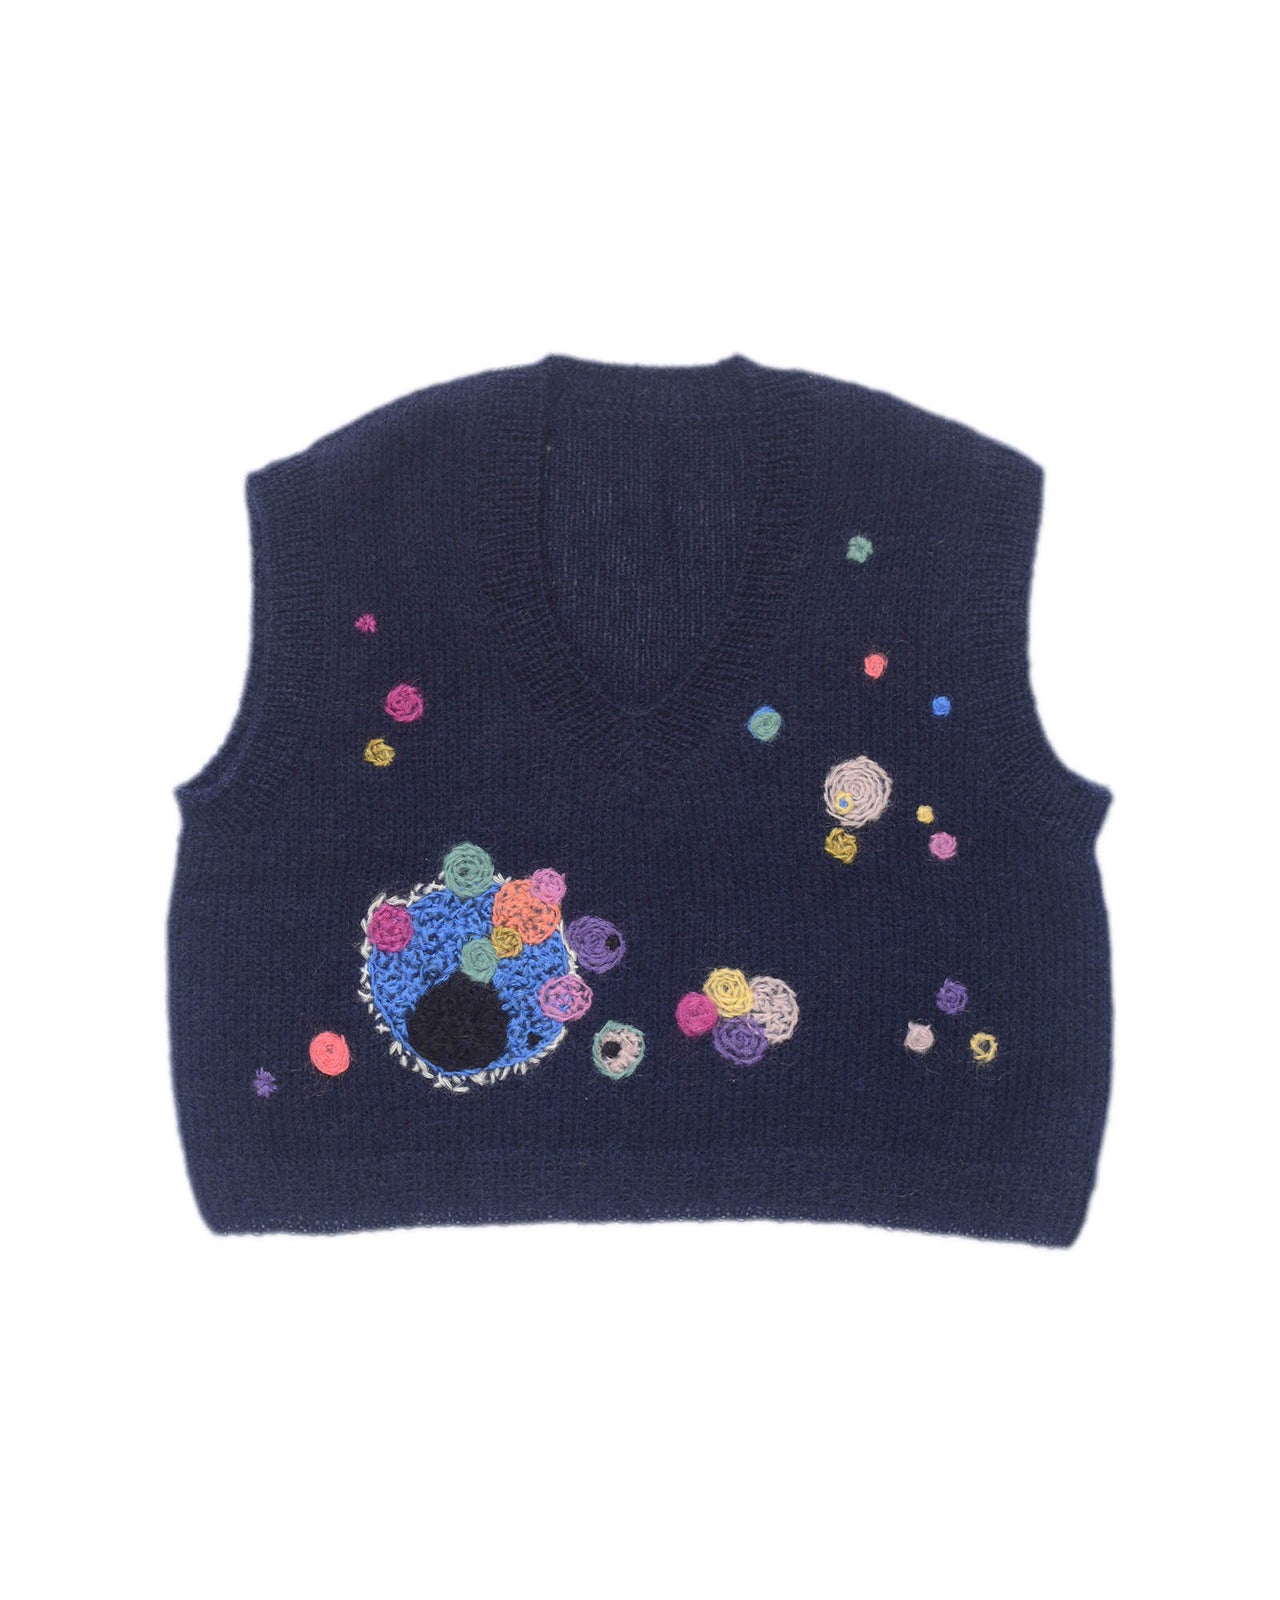 Navy mohair vest laid flat on white background. The vest is adorned with abstract star-like colourful embroideries 